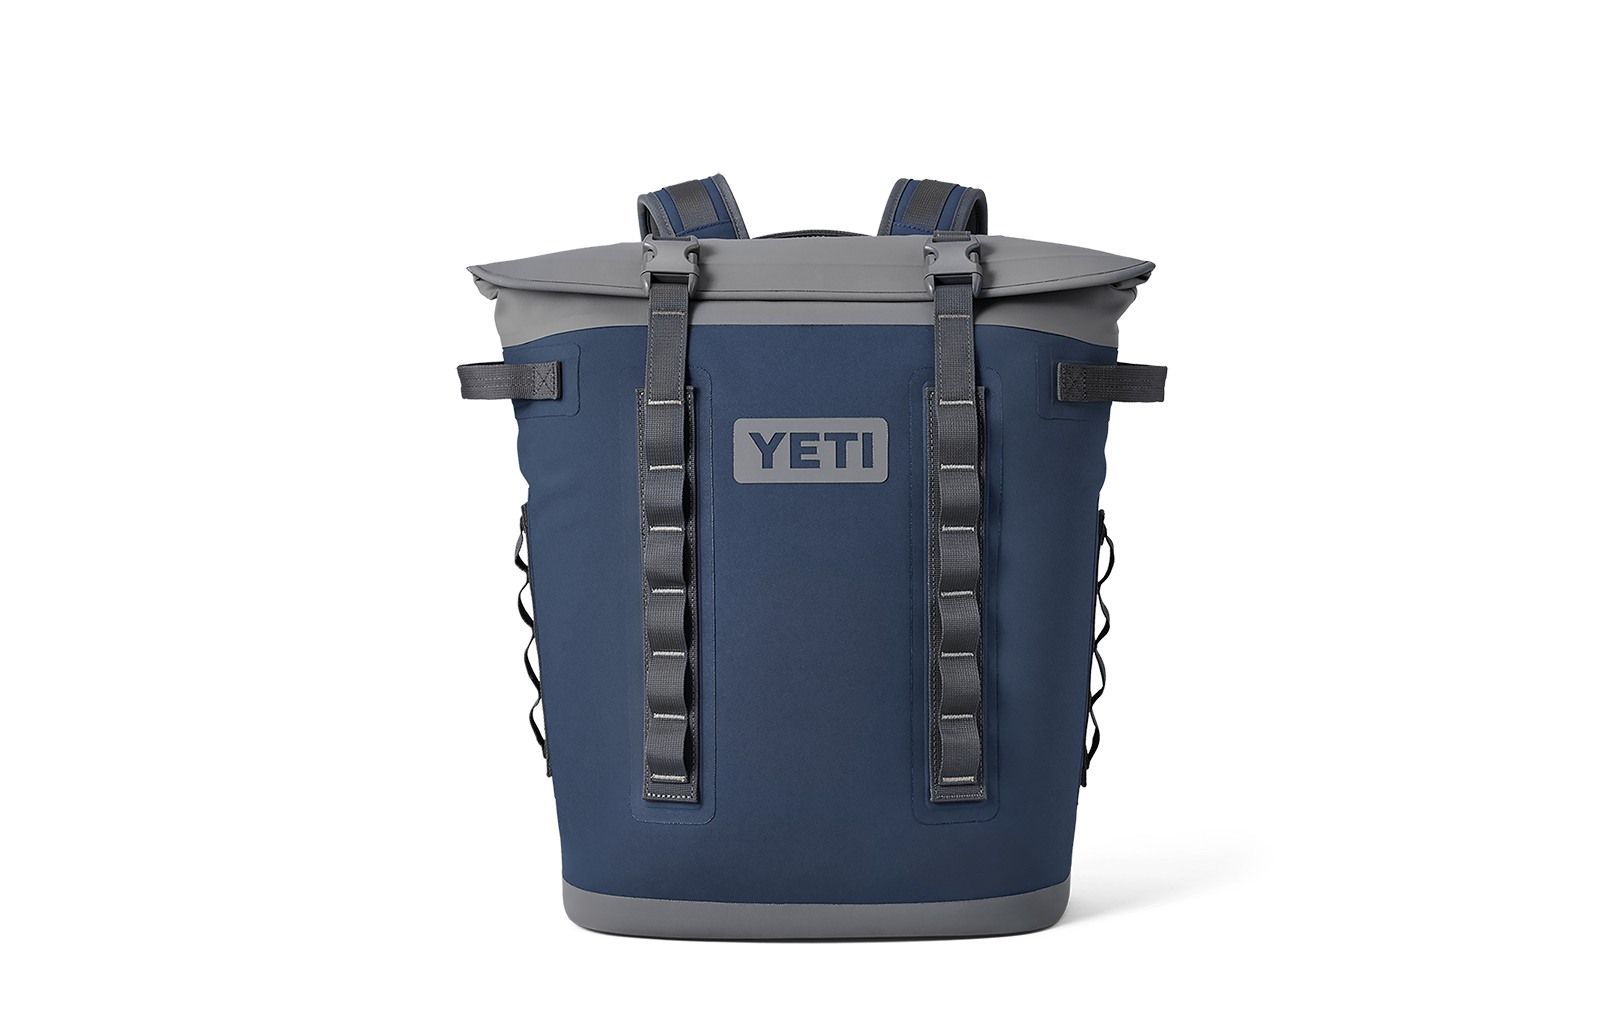 Nearly 2M YETI coolers recalled after multiple reported magnetic